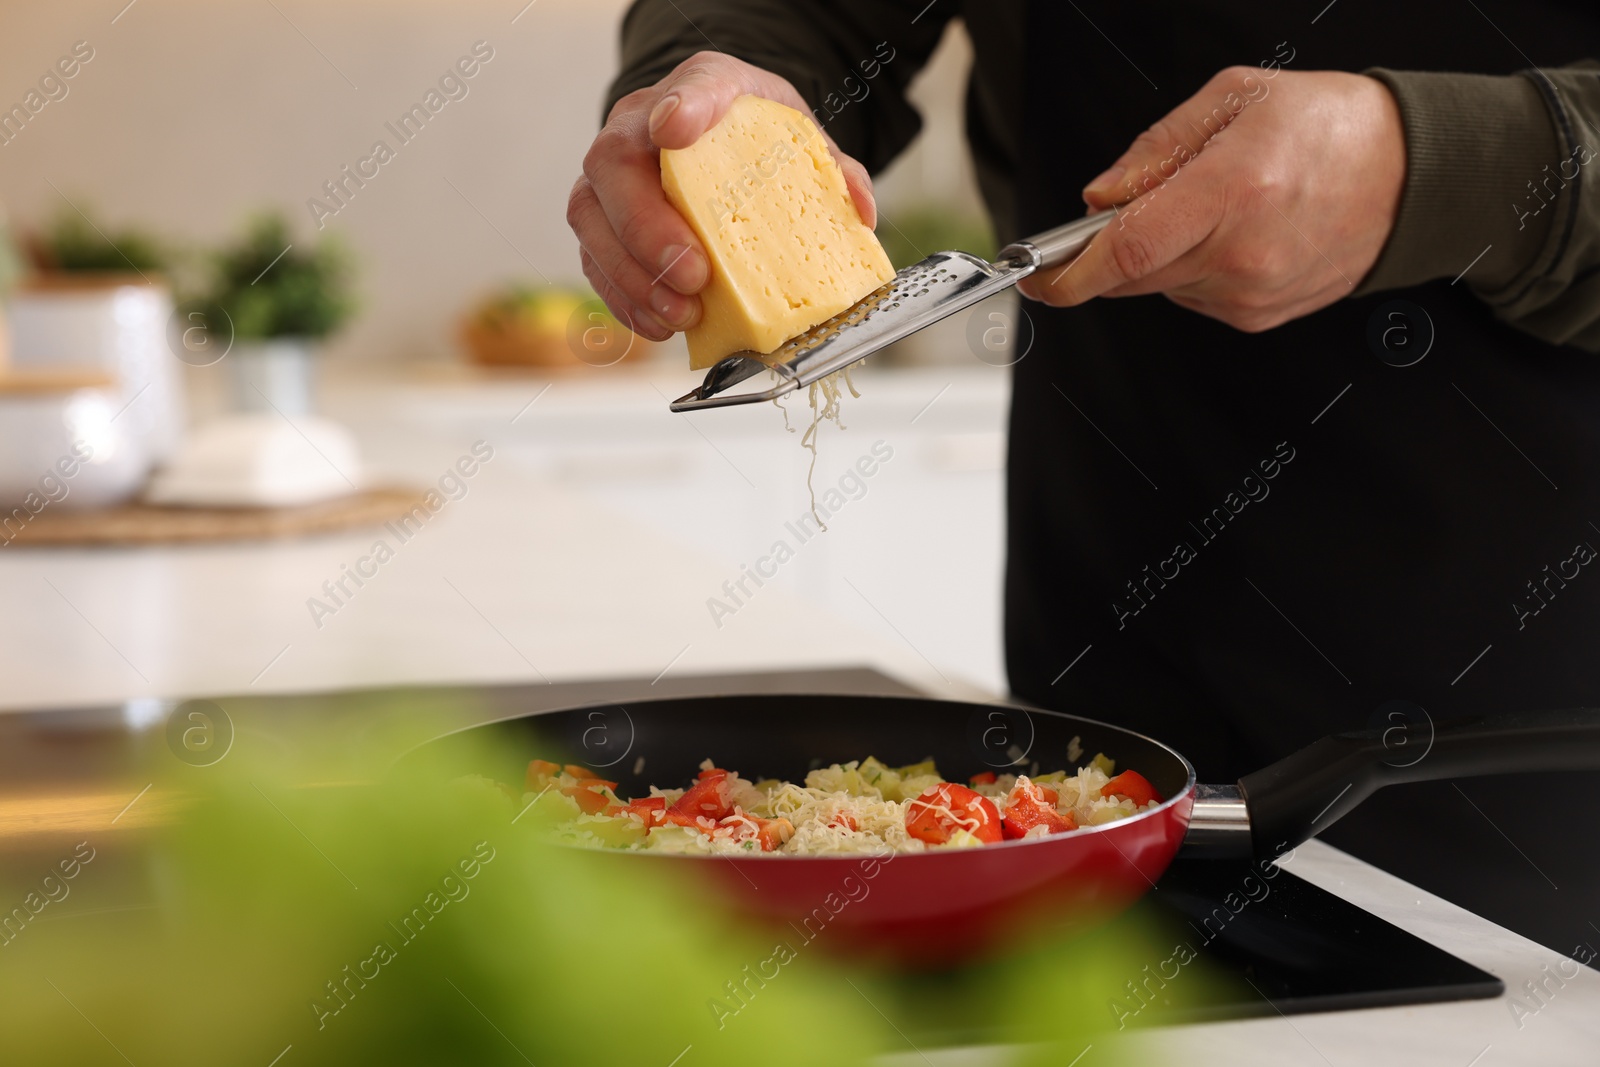 Photo of Cooking process. Man grating cheese into frying pan in kitchen, closeup